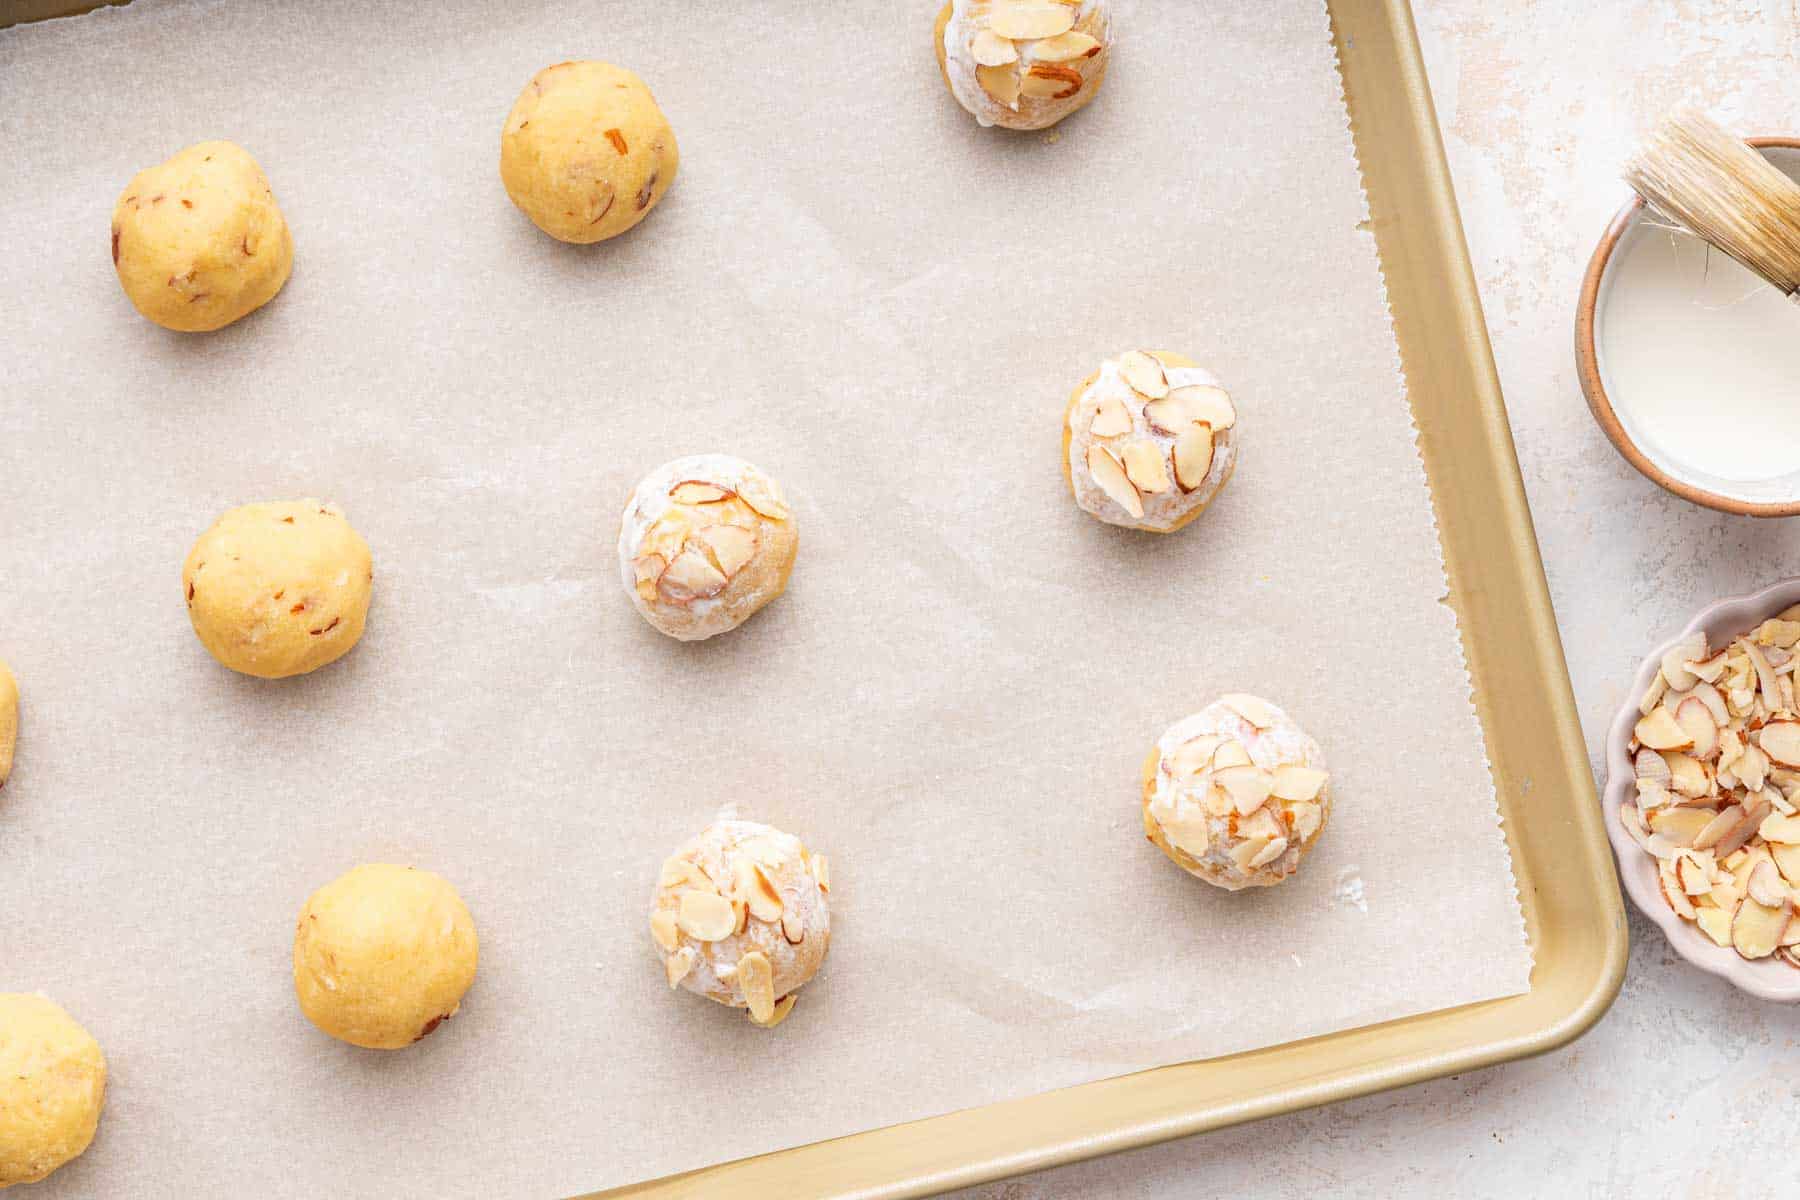 Yellow cookie dough balls brushed with cream and sprinkled with sliced almonds.